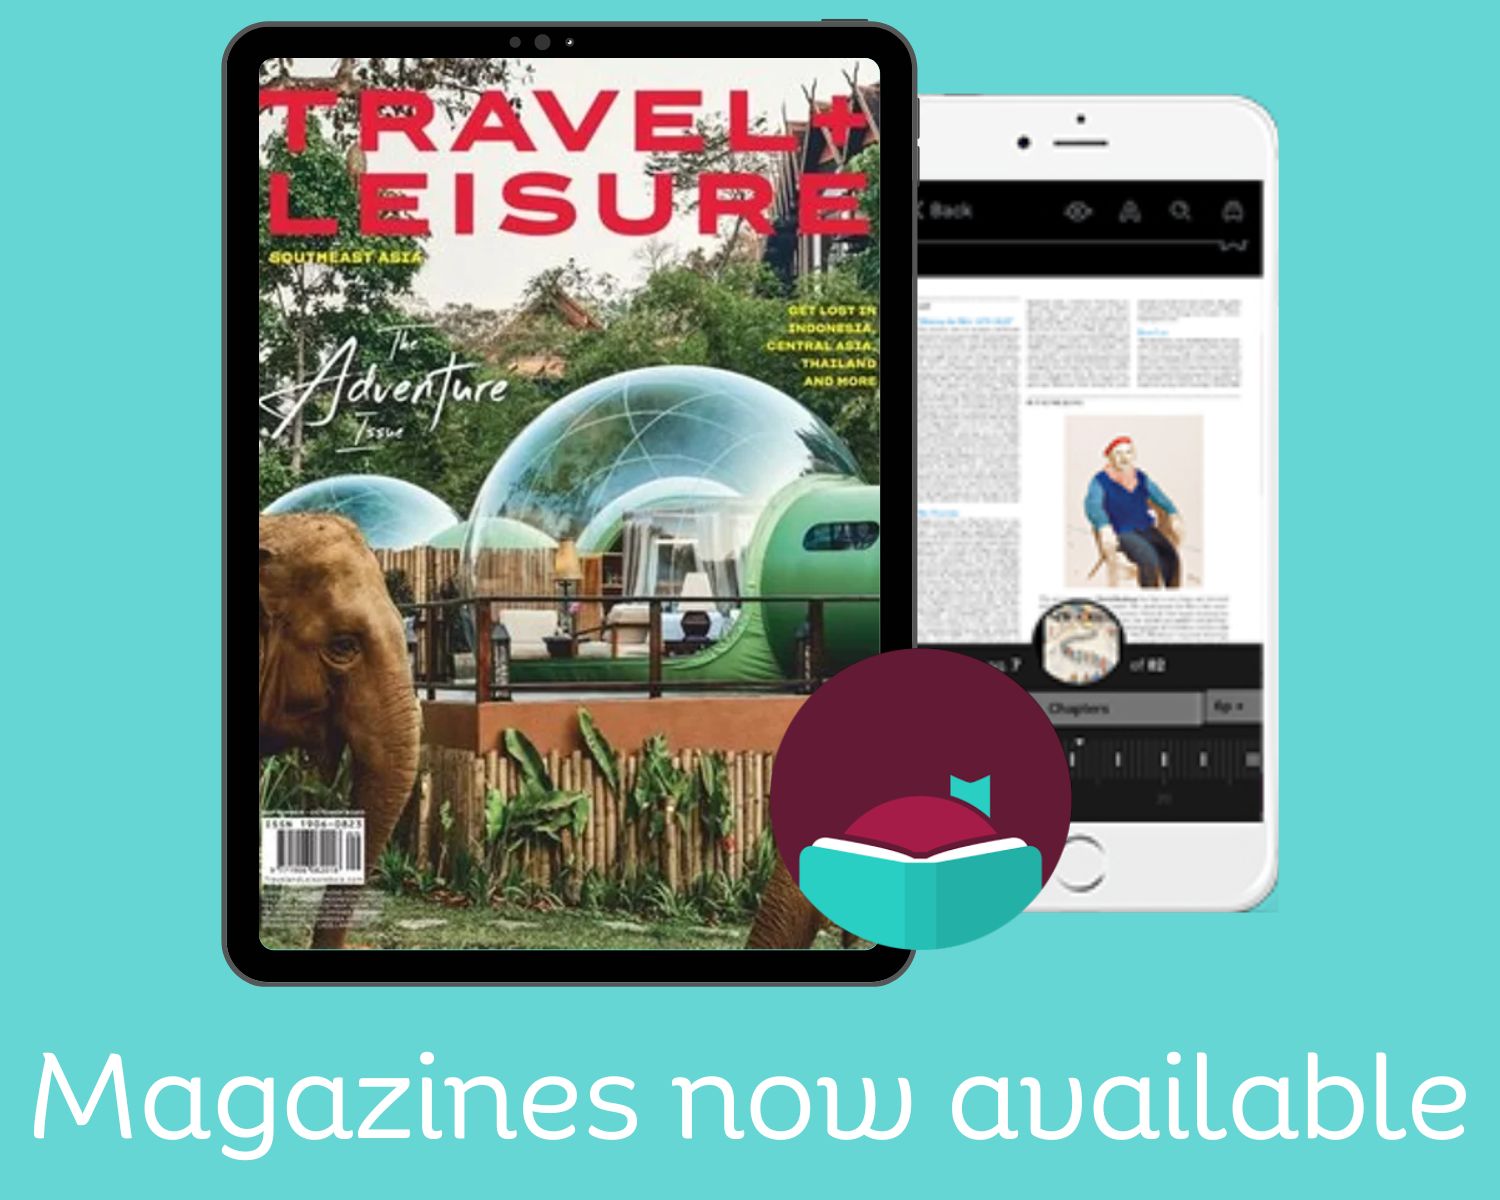 "Magazines now available" - an iPad with the magazine cover for Travel Leisure and the inside of the magazine on an iPhone screen